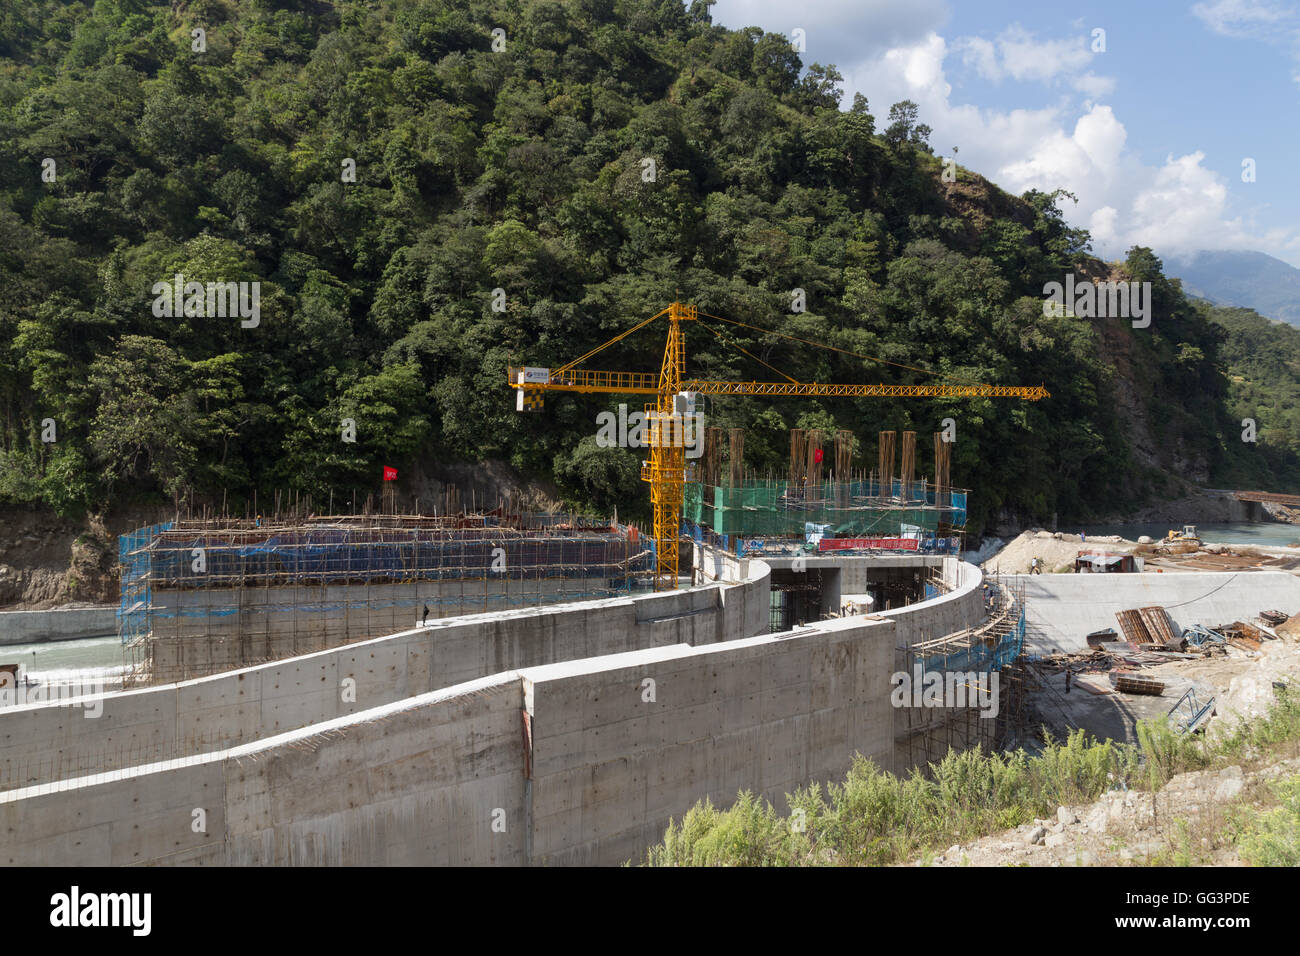 Bhulbhule, Nepal - October 23, 2014: Construction site of the Upper Marsyangdi Hydropower Project in the Annapurna Region Stock Photo